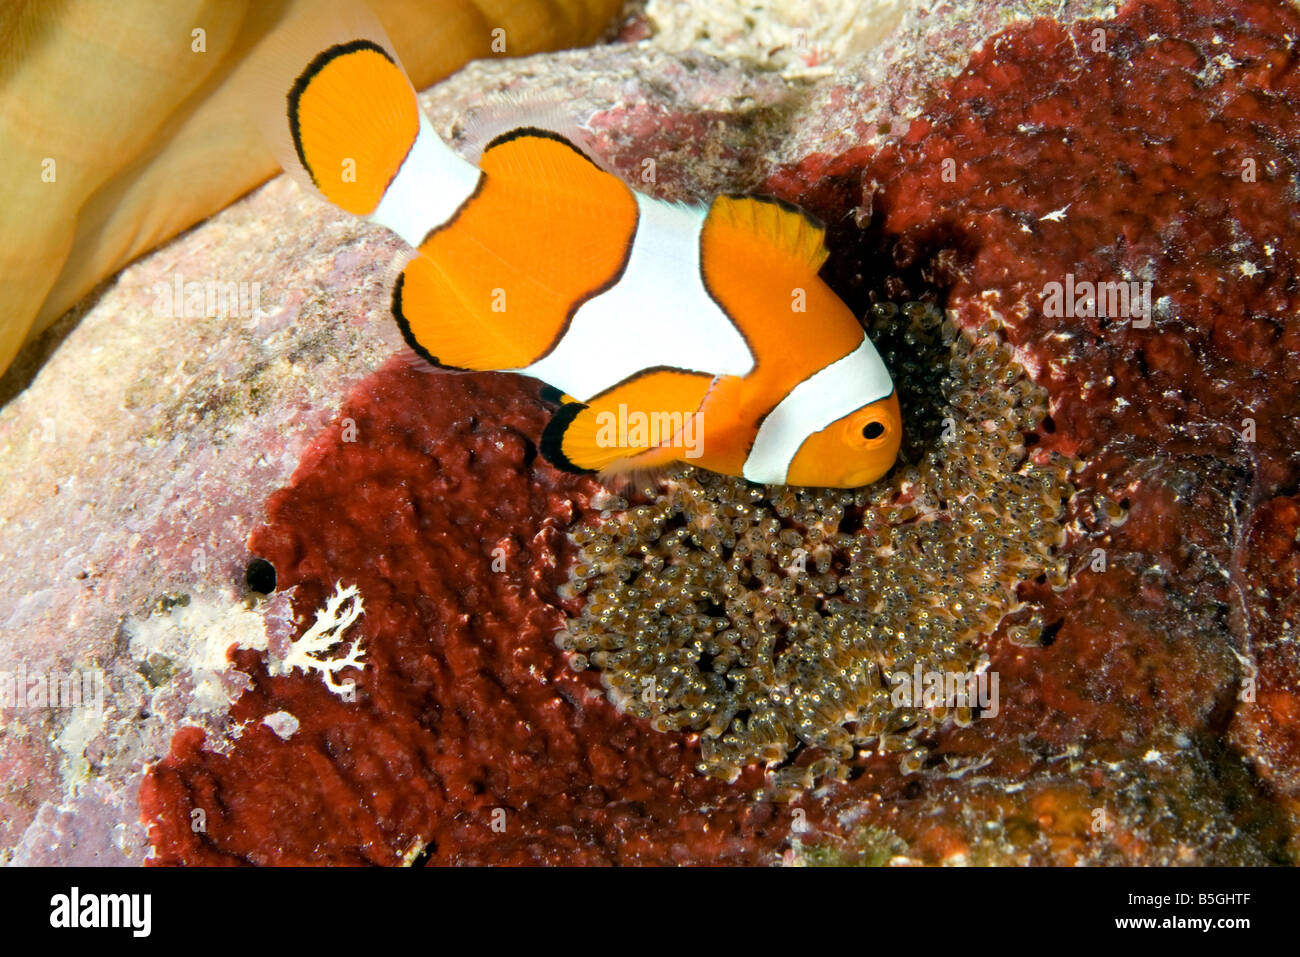 A clown anemonefish tending its eggs laid under the anemone. The eggs are almost ready to hatch and the babies eyes can be seen Stock Photo